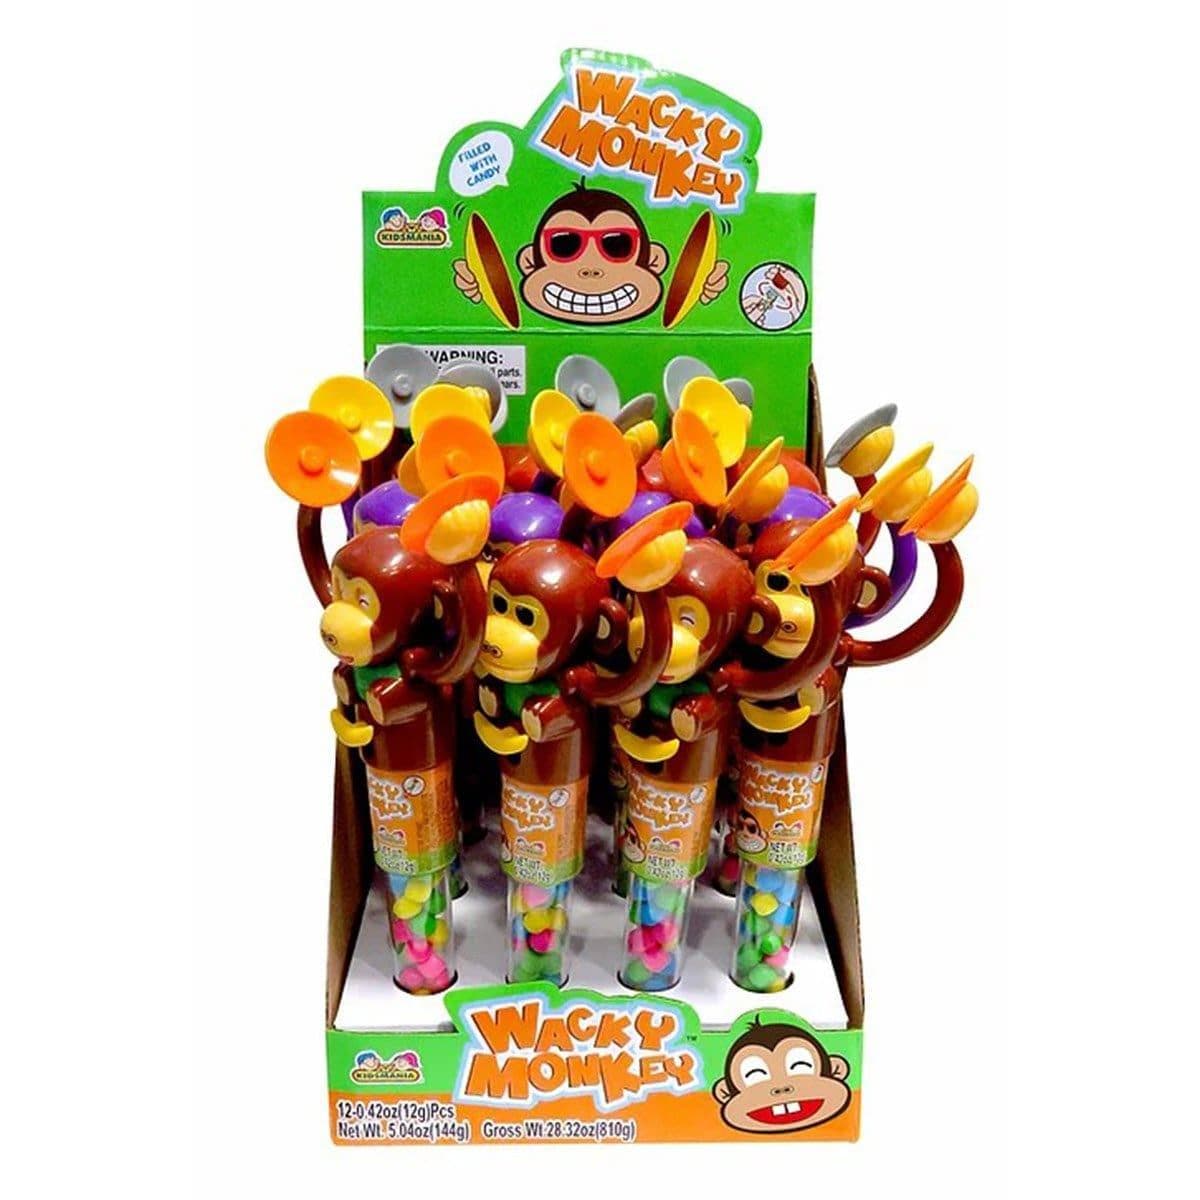 Buy Candy Wacky Monkey sold at Party Expert